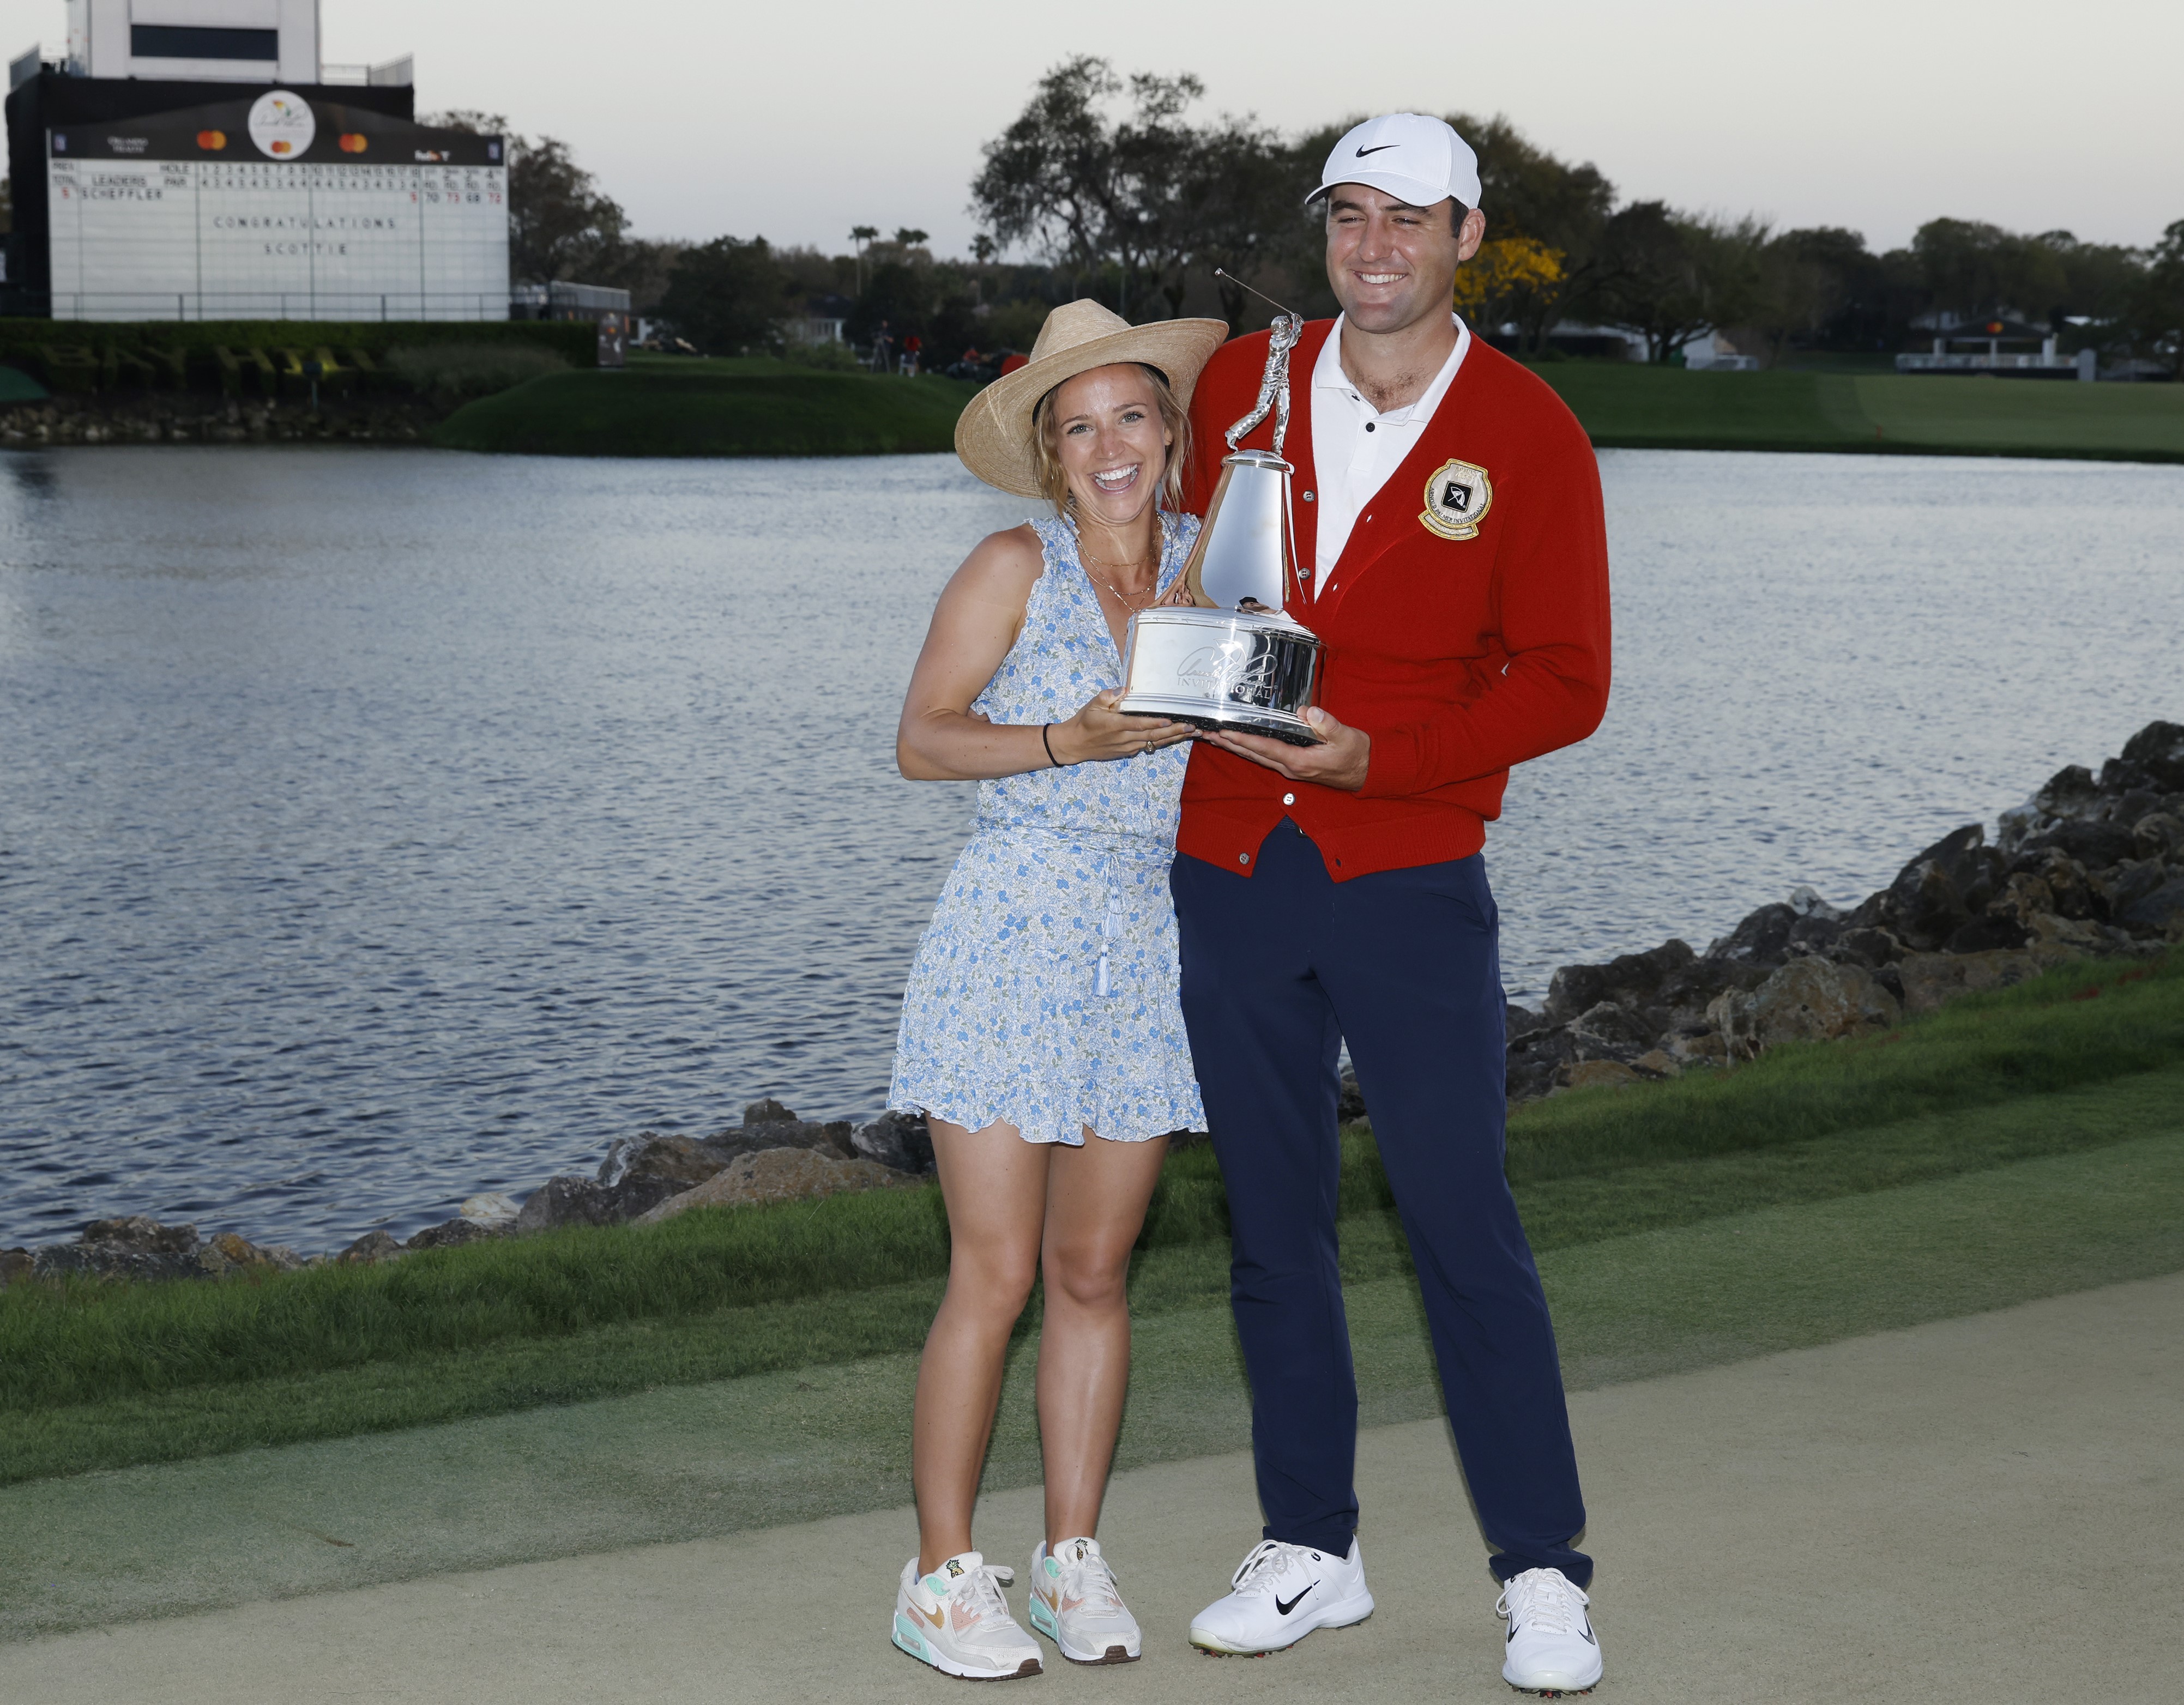 Scottie Scheffler and his wife Meredith Scudder, who he met in high school, holding the trophy after winning the Arnold Palmer Invitational